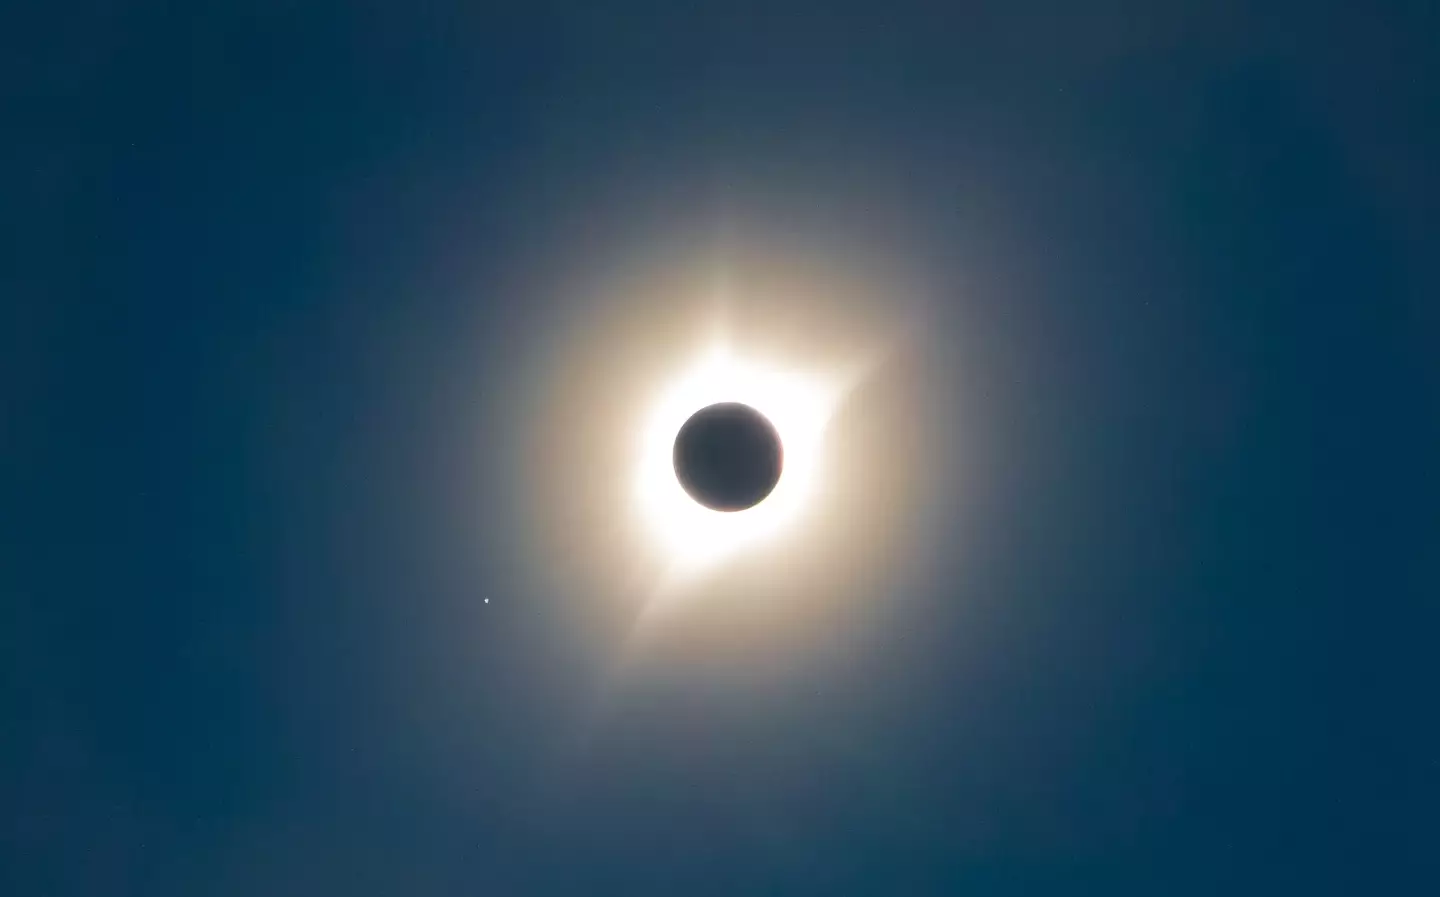 If you do manage to spot it, remember you should never stare at an eclipse directly.